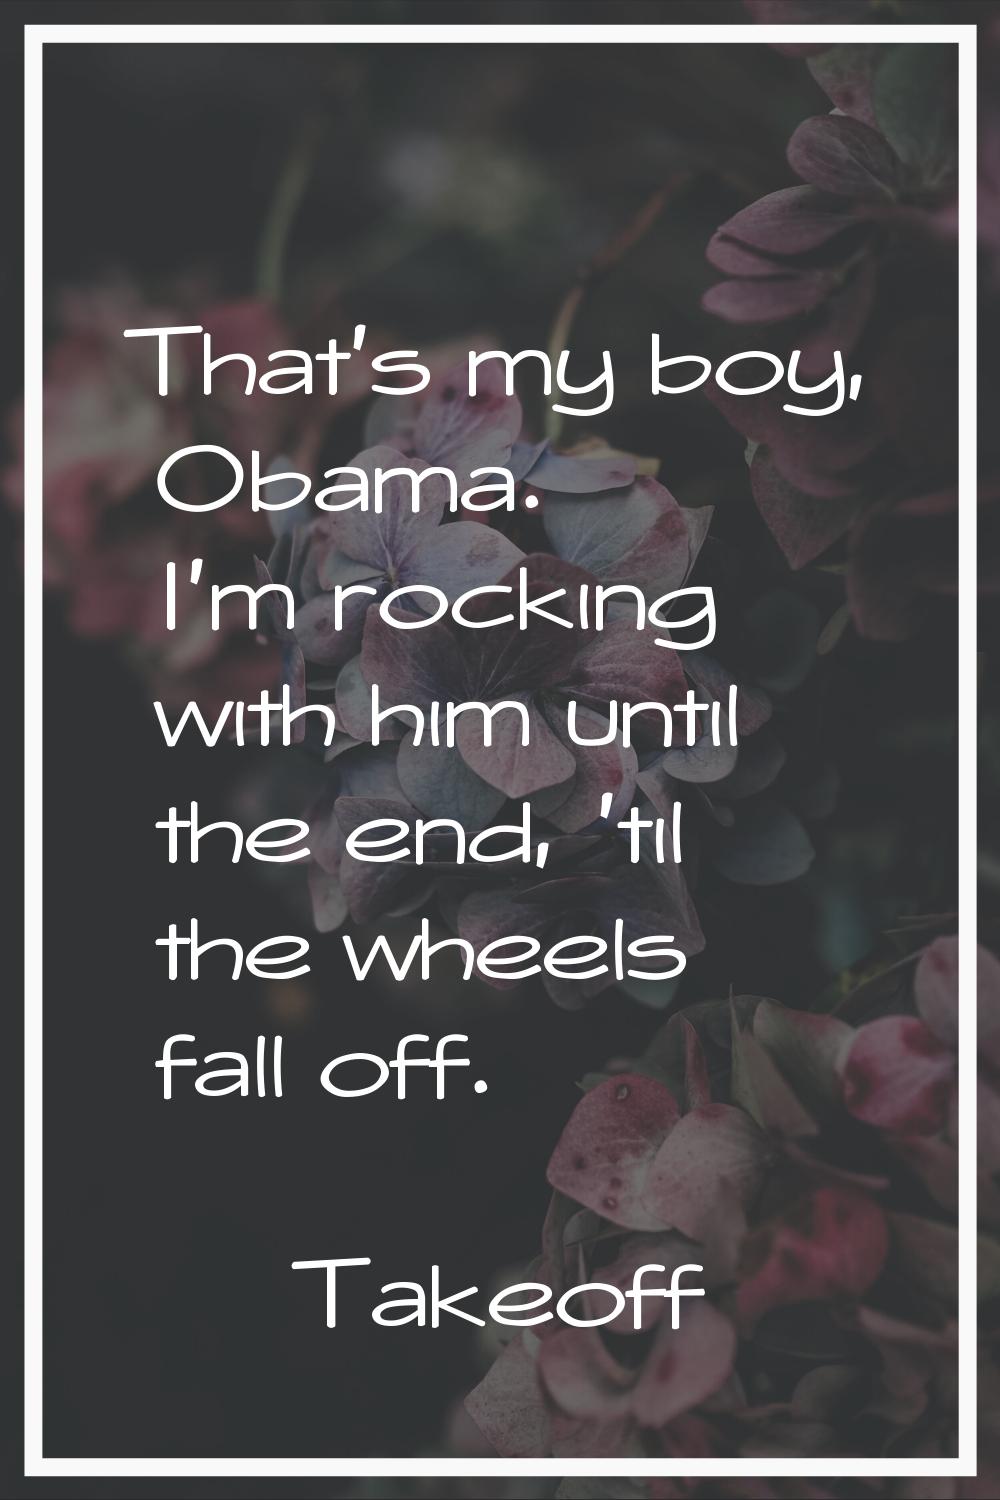 That's my boy, Obama. I'm rocking with him until the end, 'til the wheels fall off.